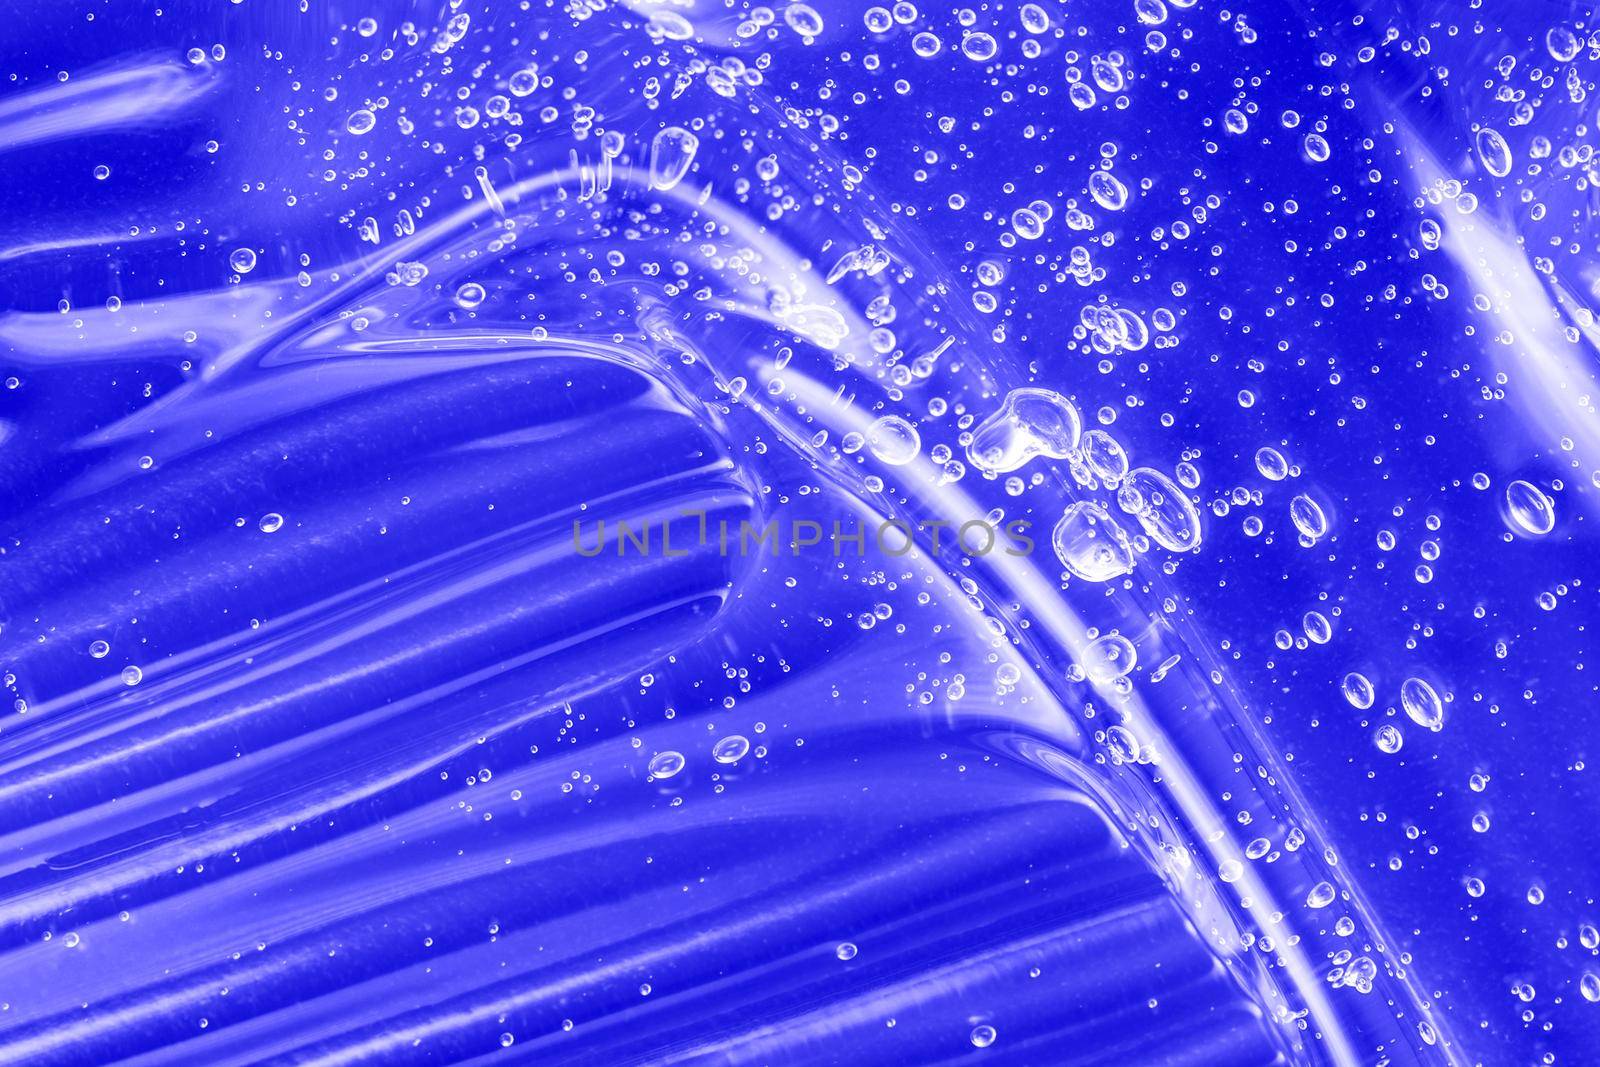 Liquid antibacterial disinfect smear smudge. Cosmetic blue gel texture with bubbles. Hyaluronic acid clear serum sample. Skincare moisturizing product background. Sanitizer swatch. Close-up, macro.